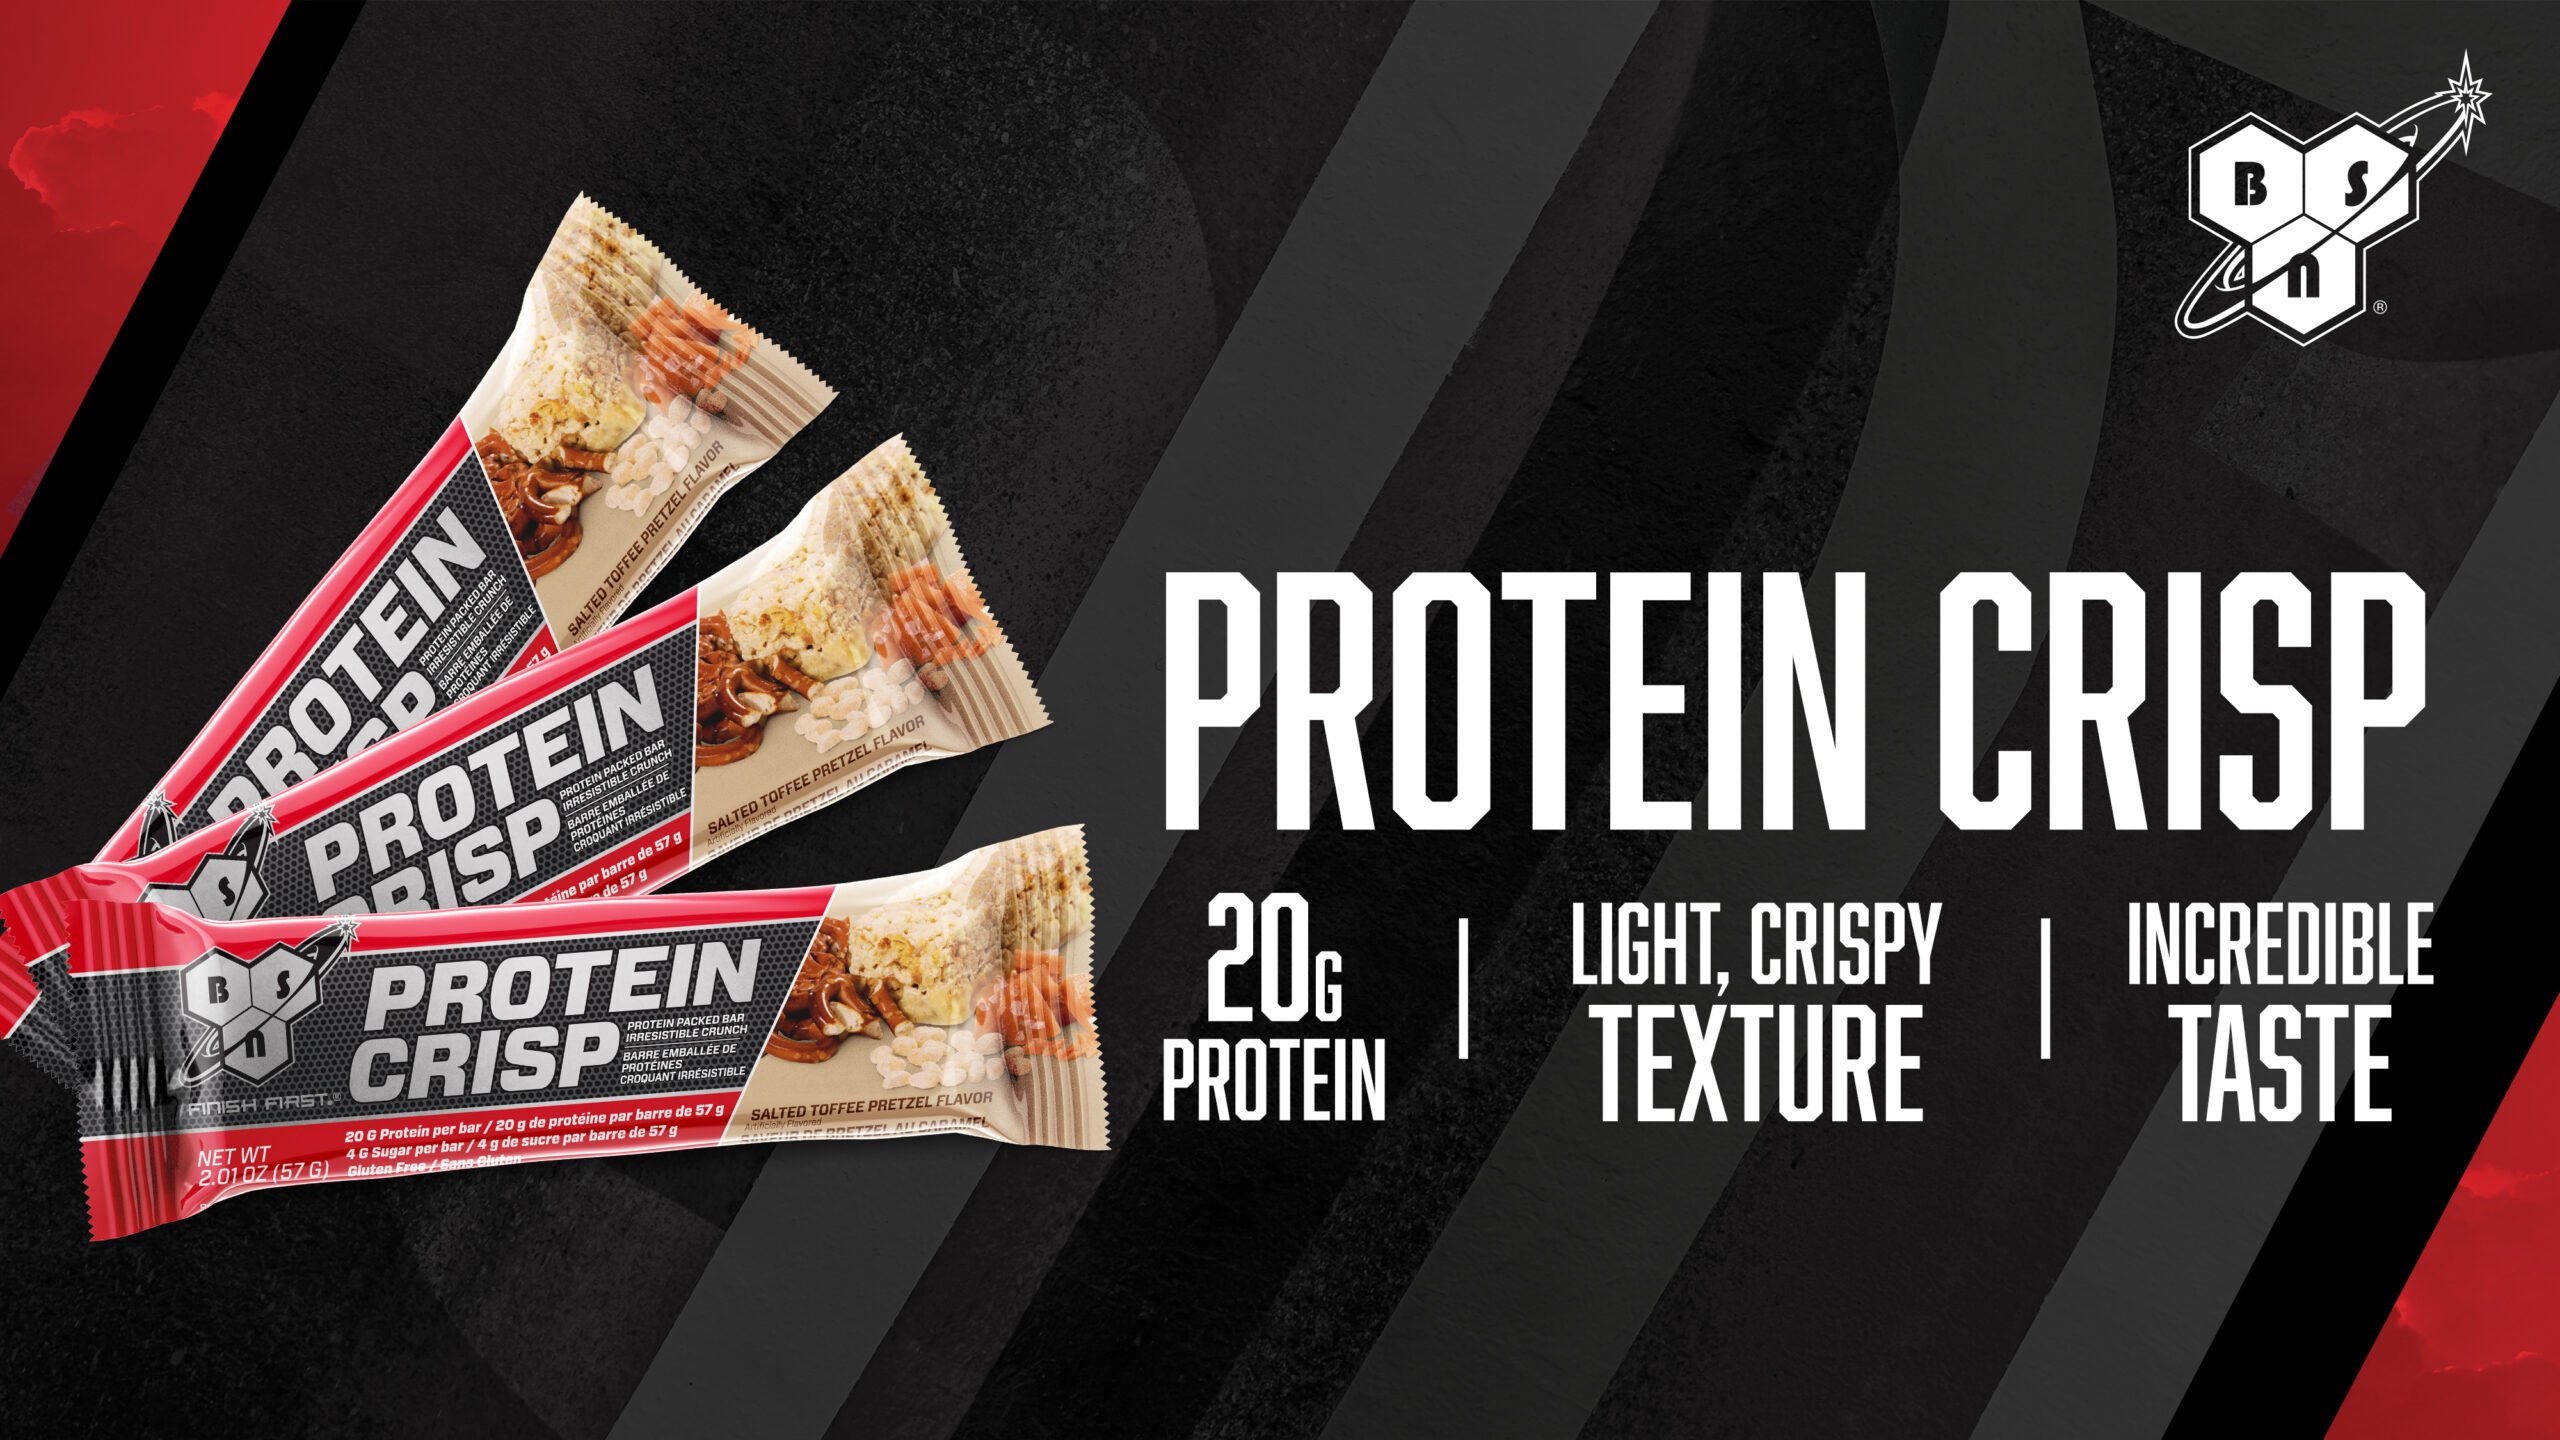 BSN_Canadian banners_TVmonitor_ProteinCrisp